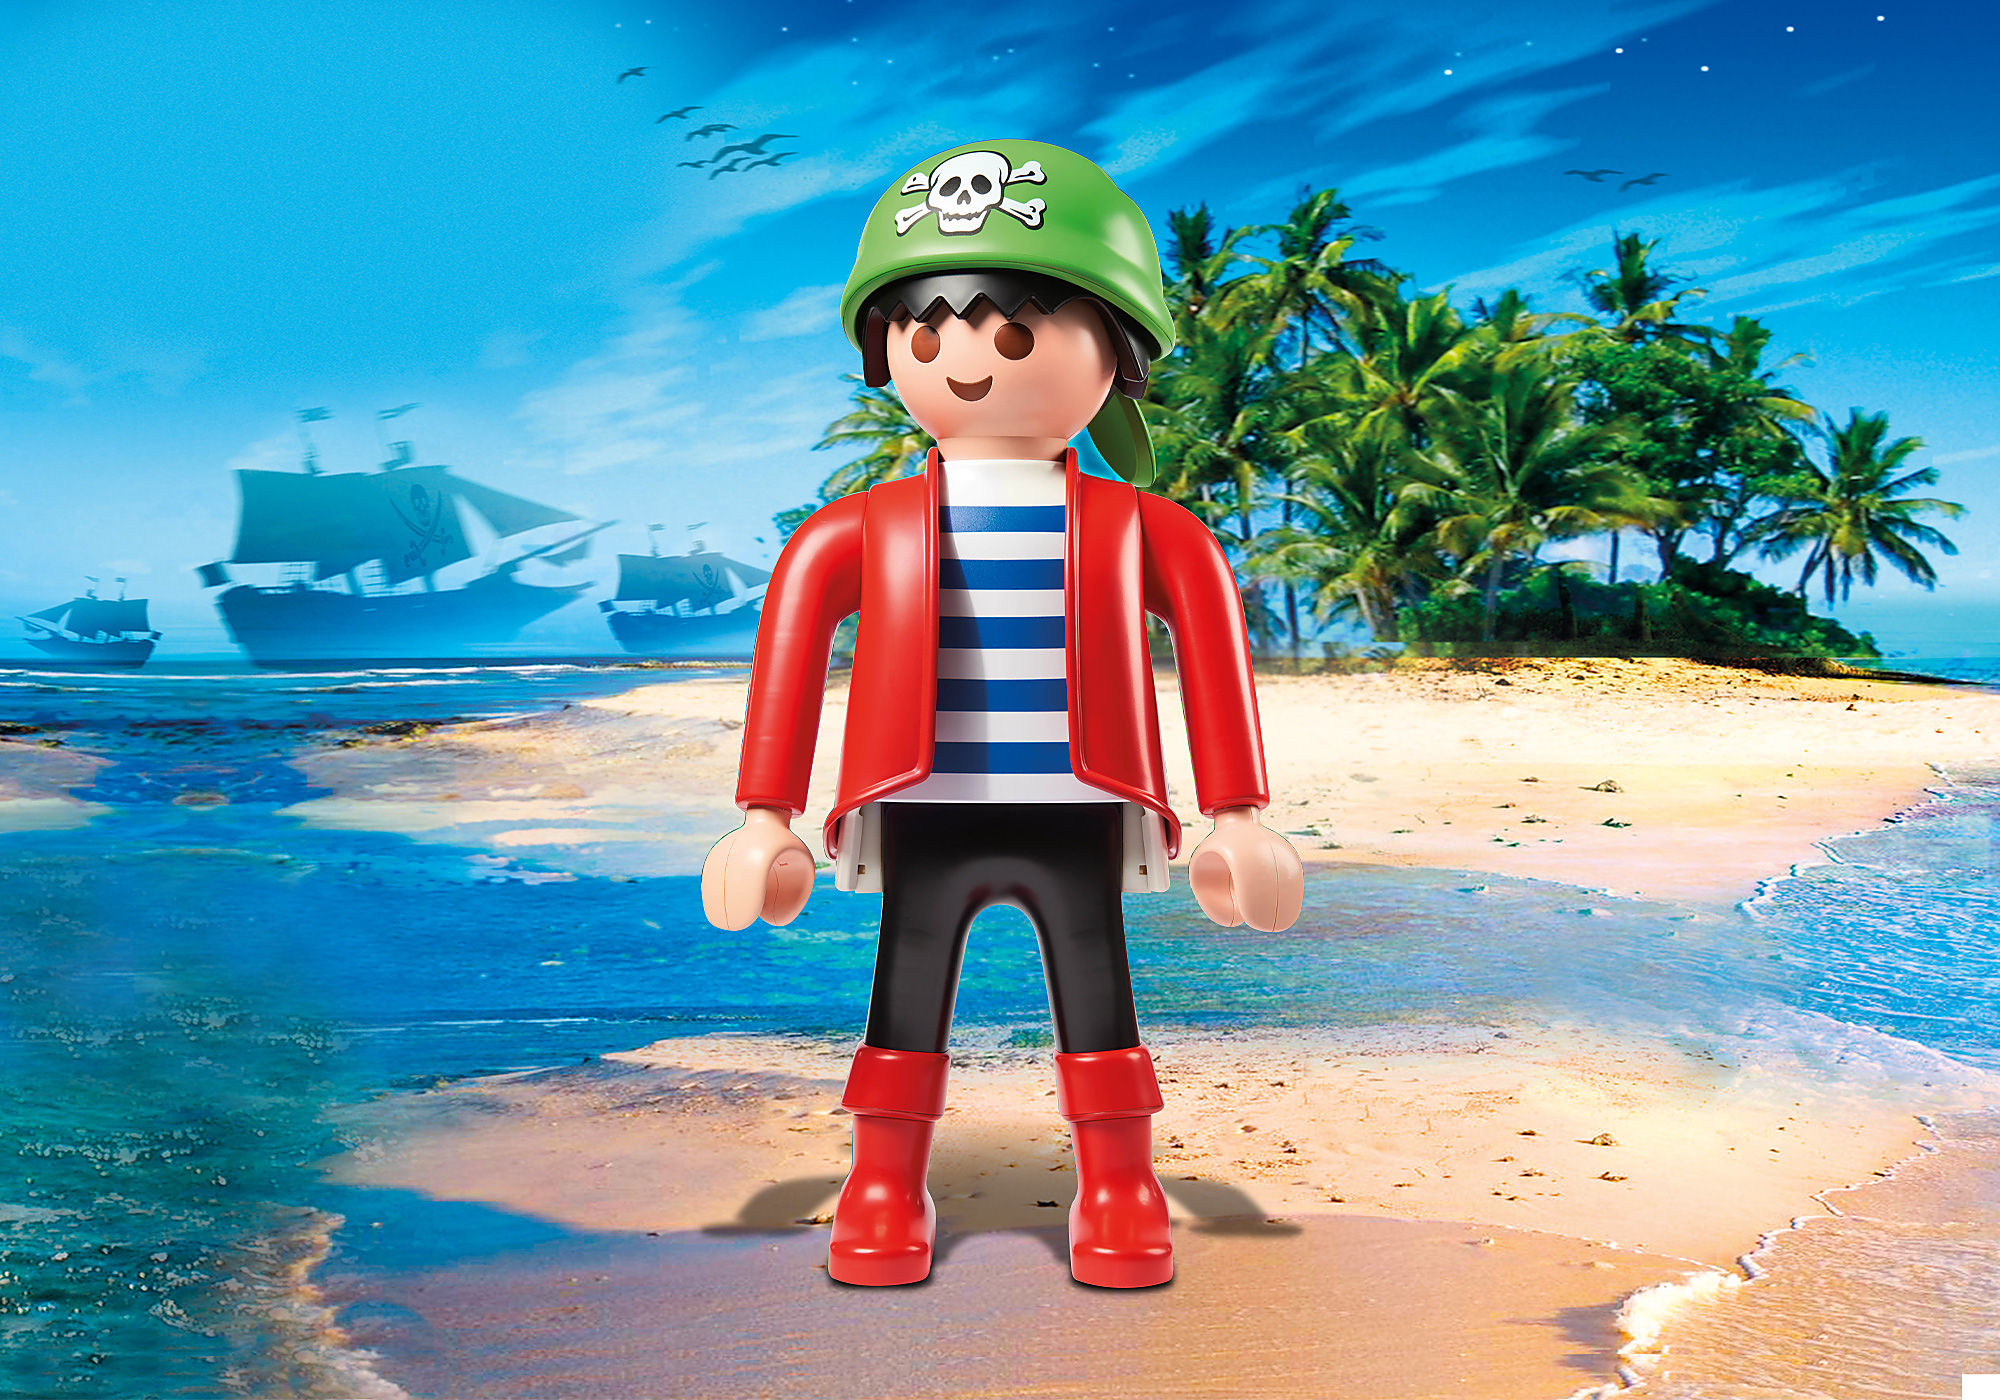 Grand Personnages Figurines XXL Playmobil